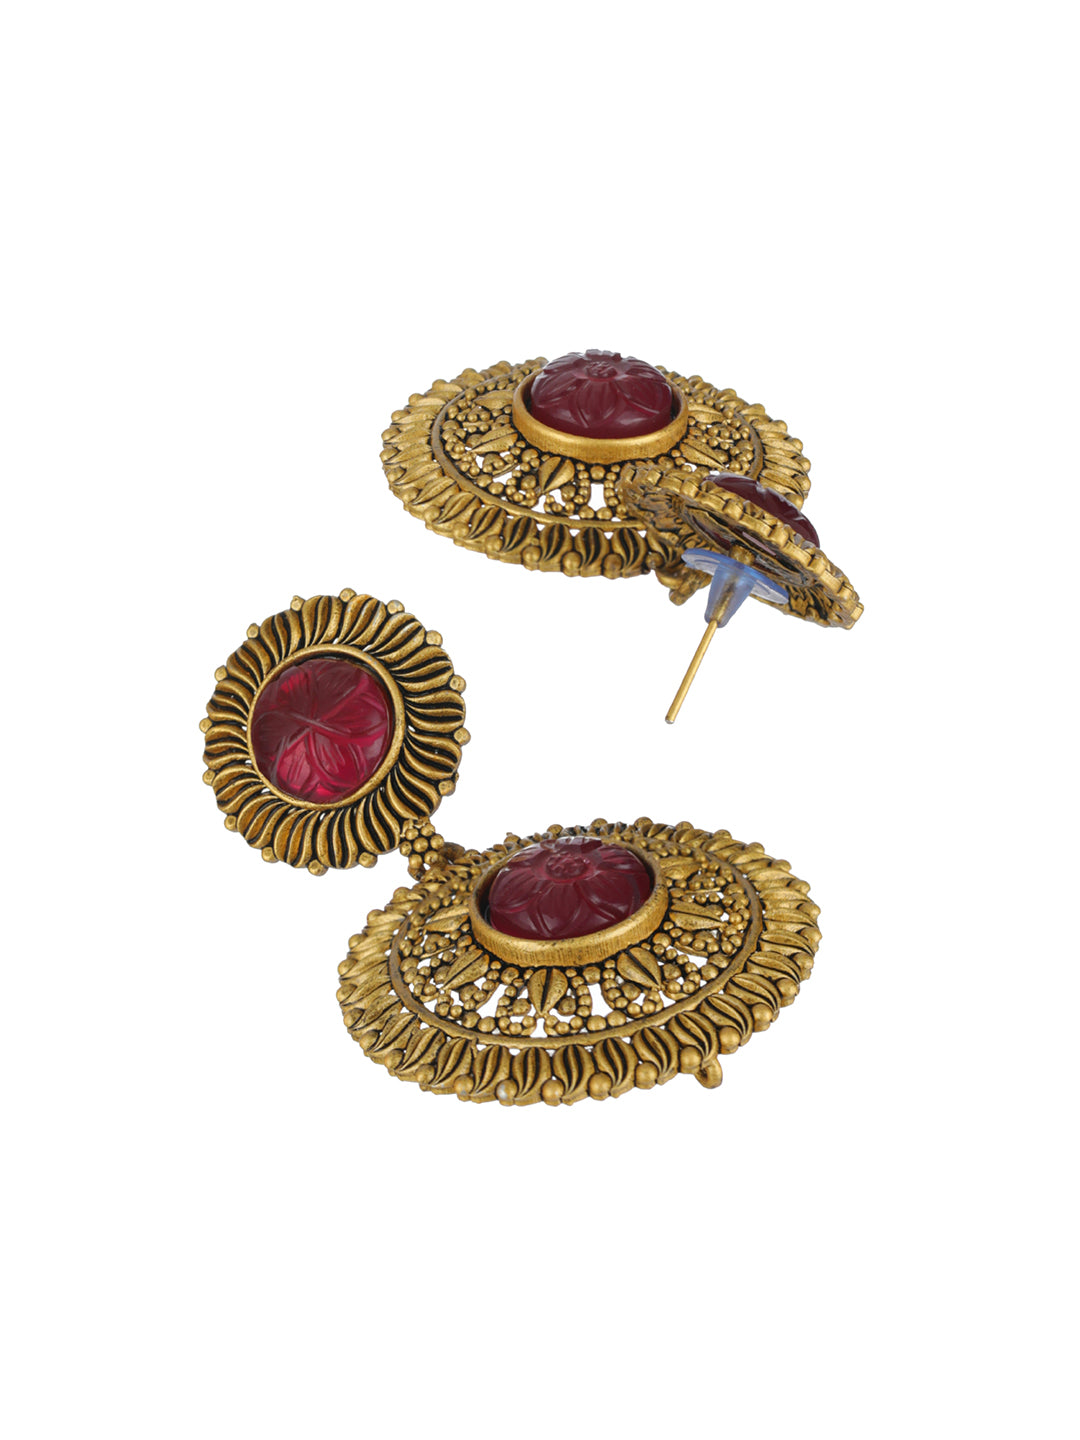 Priyaasi Red Round Floral Gold-Plated Drop Earrings